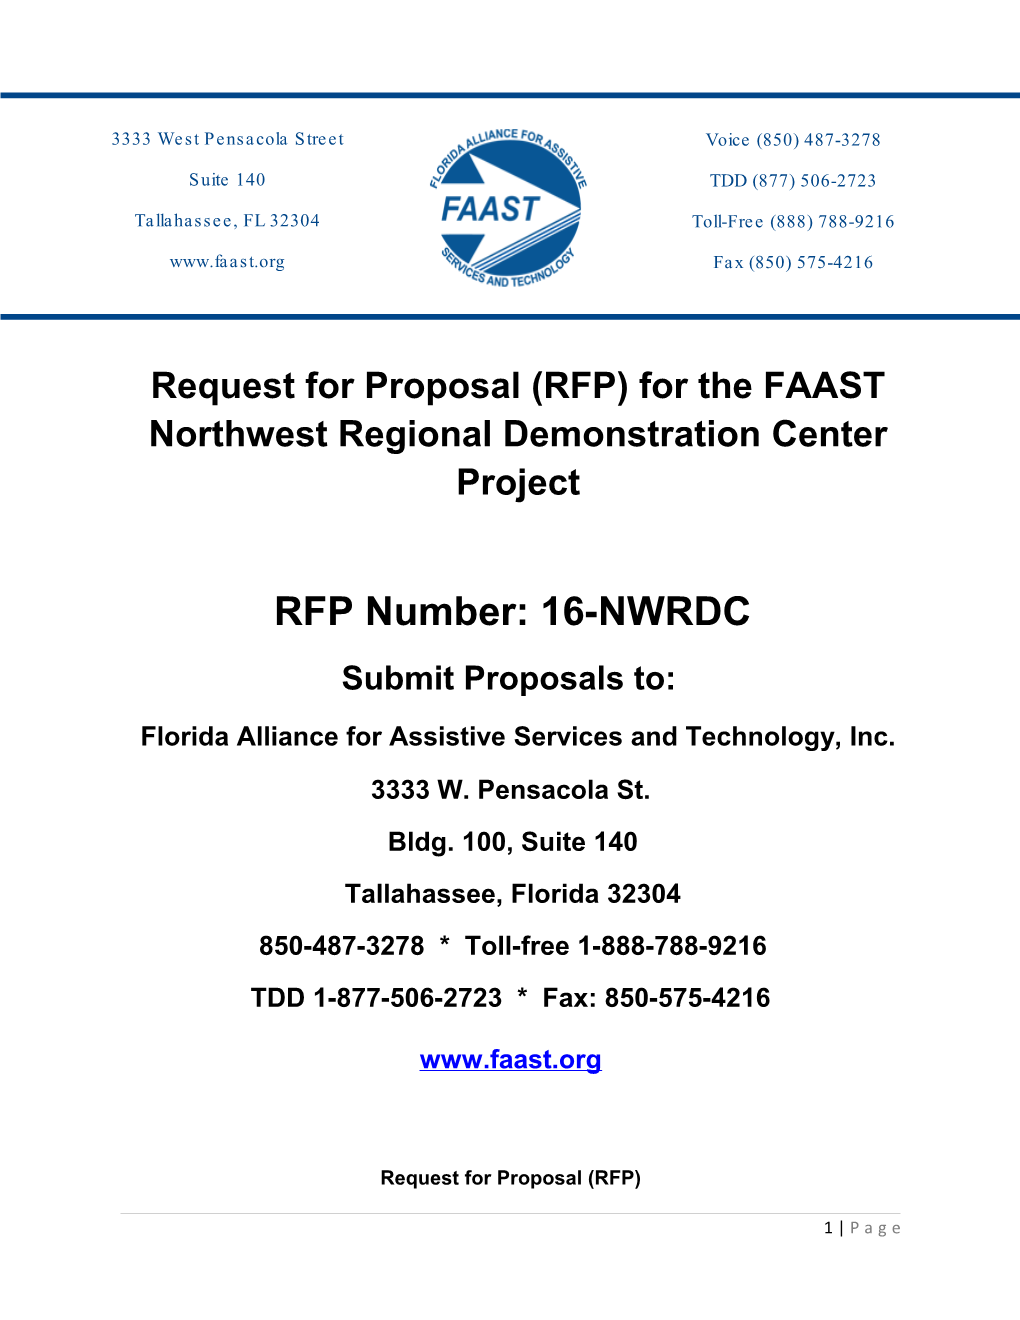 Request for Proposal (RFP) for the FAAST Northwest Regional Demonstration Center Project